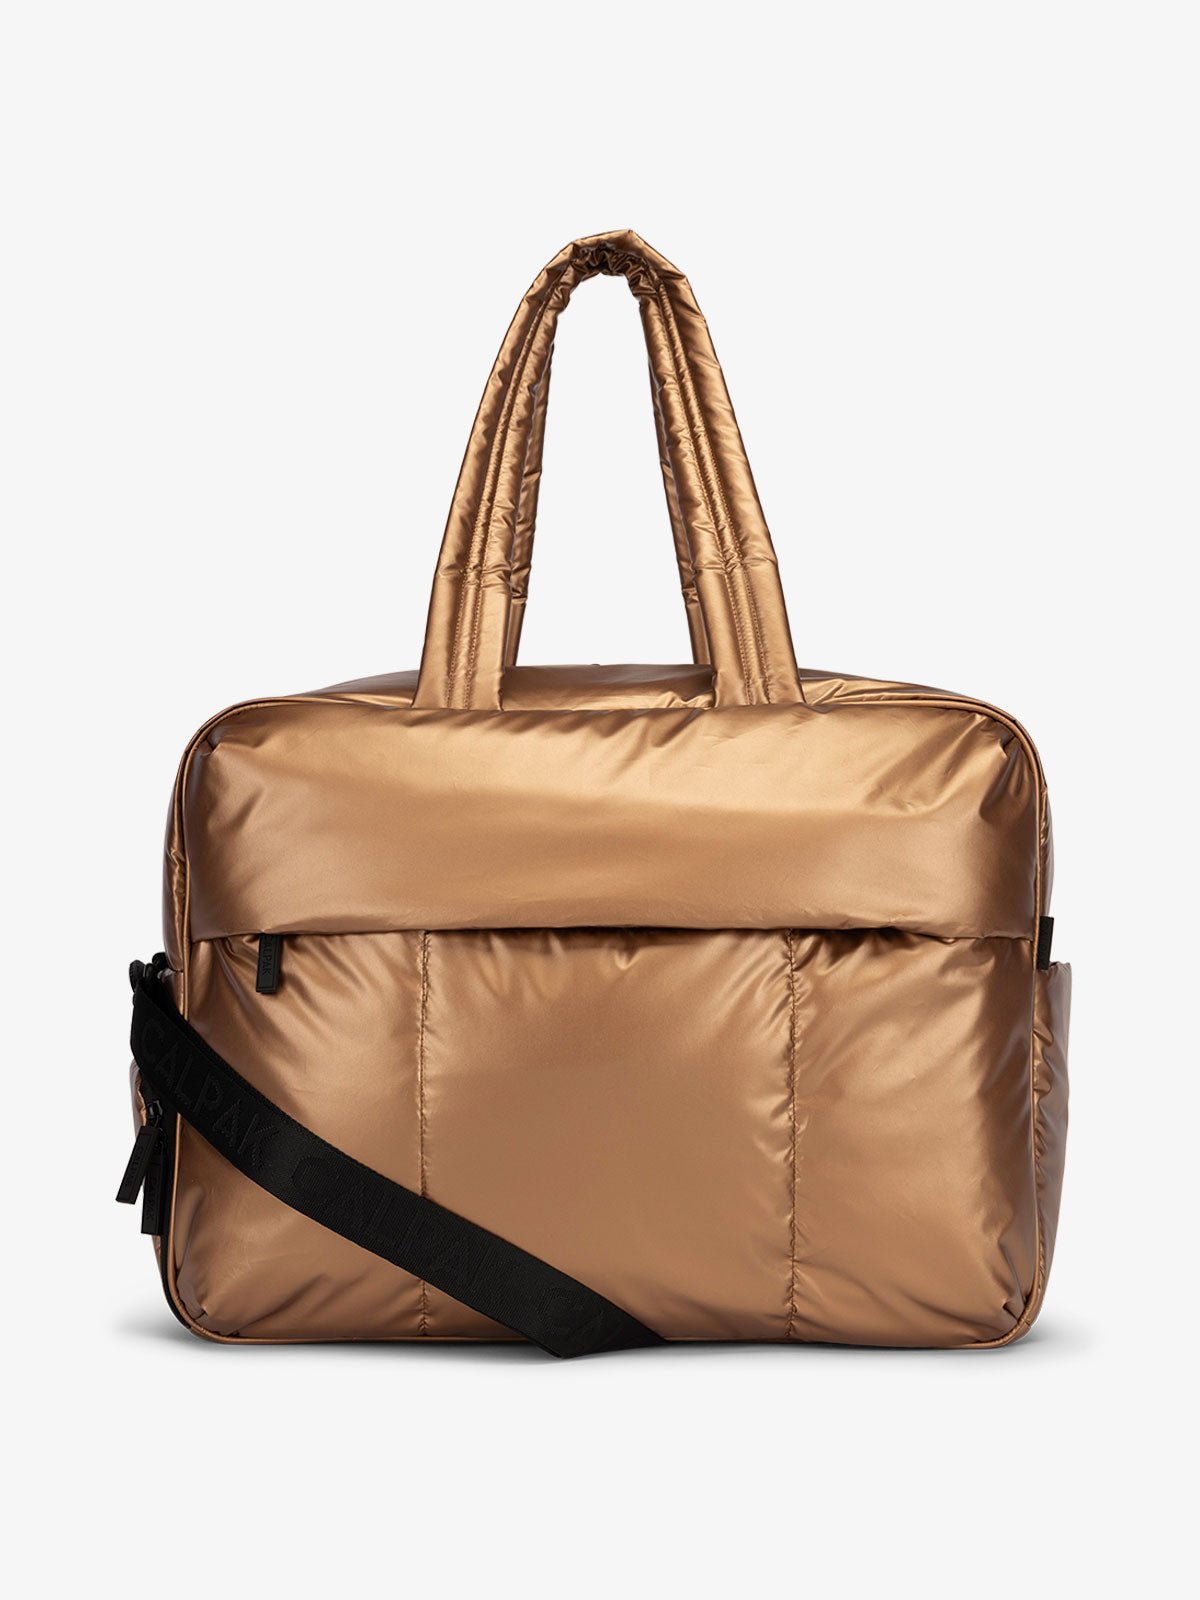 CALPAK Luka large duffle bag with detachable strap and zippered front pocket in metallic brown